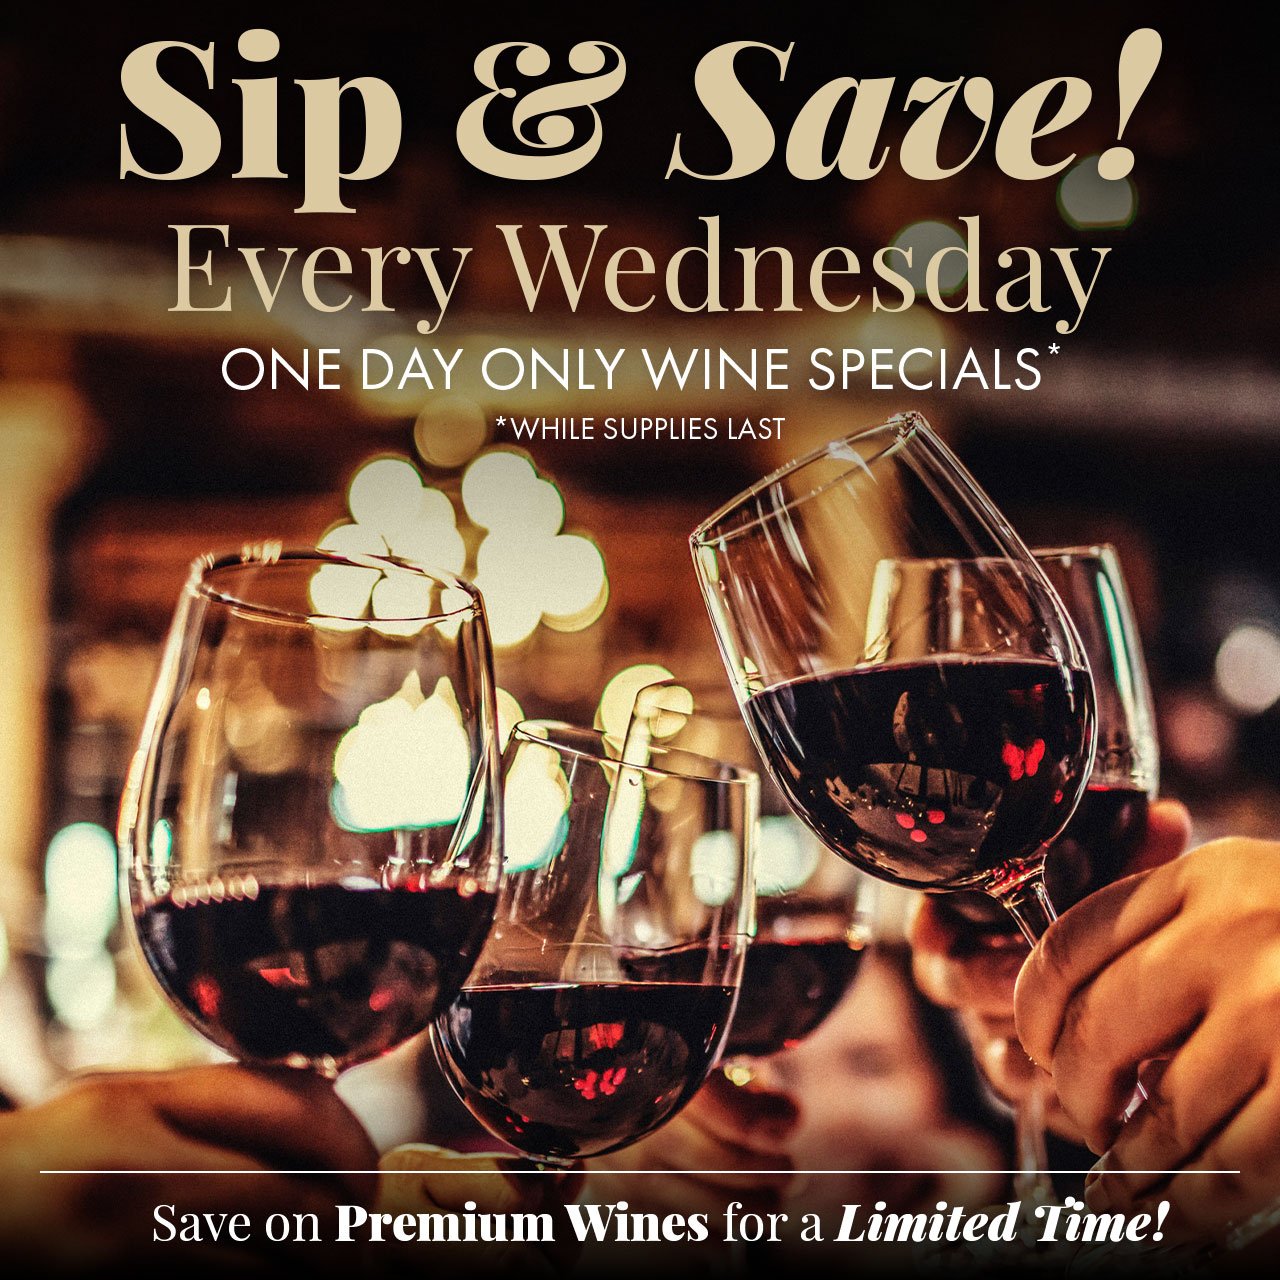 Sip & Save! Every Wednesday One Day Only Wine Specials* *While Supplies Last Save on Premium Wines for a Limited Time